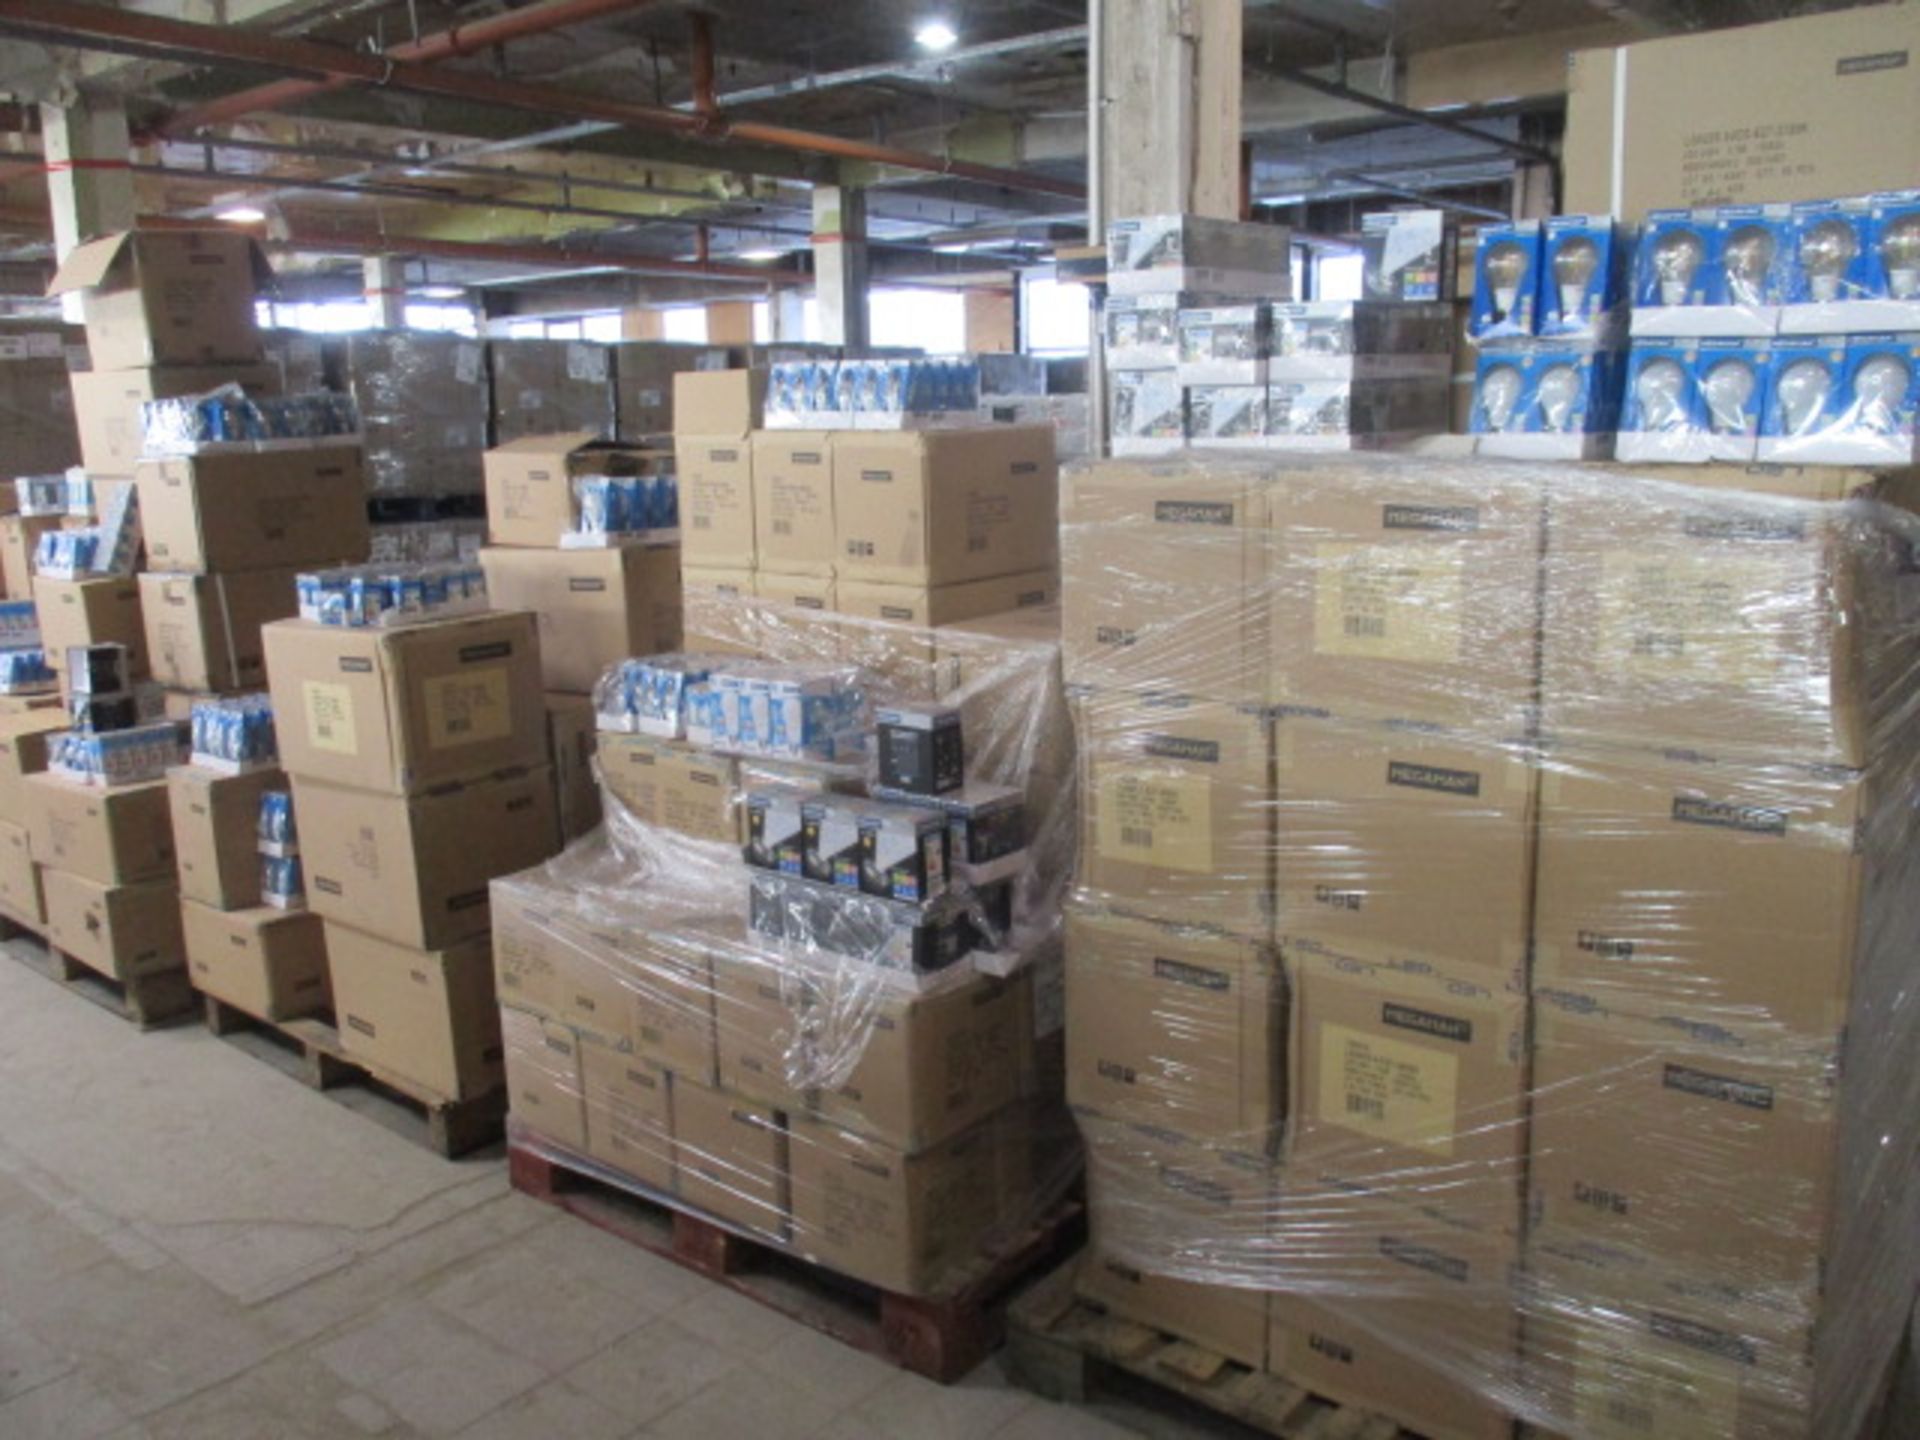 Approx. 10,000 Brand New Megaman LED Bulbs | Approx RRP £50,000+ - Image 29 of 30